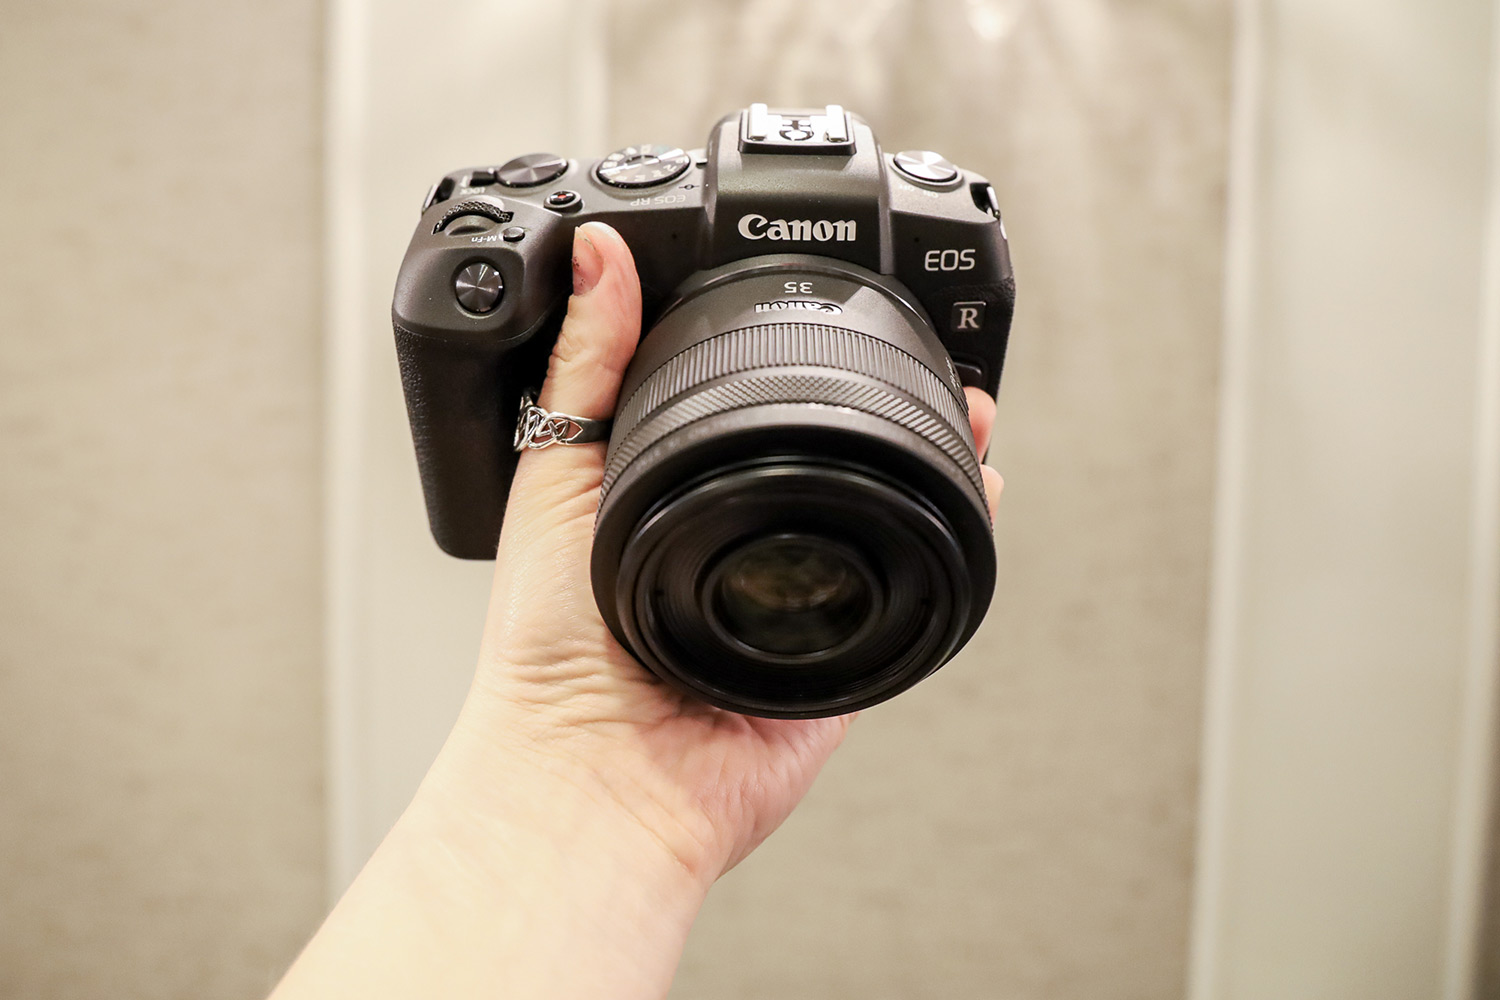 First shots with Canon's EOS RP affordable full-frame mirrorless camera